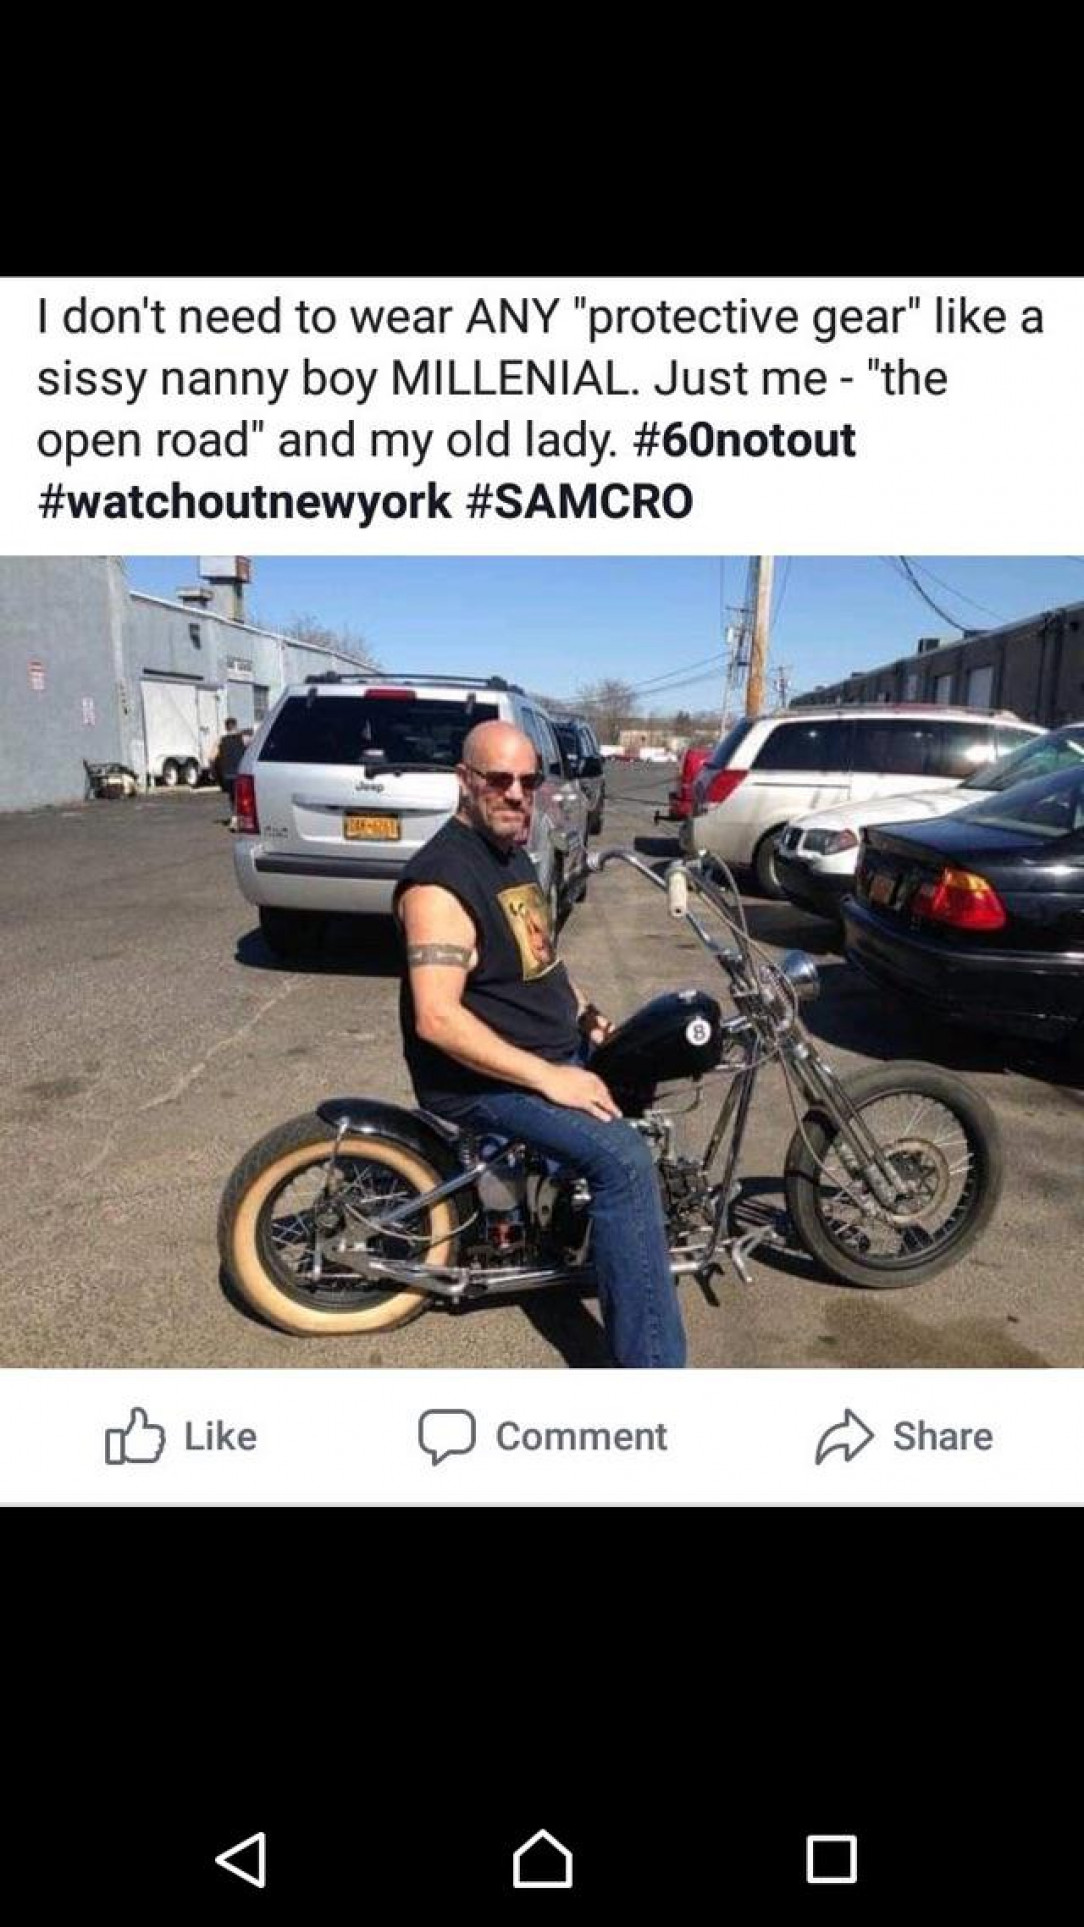 Boomer is bad ass for taking no safety precautions on his bike